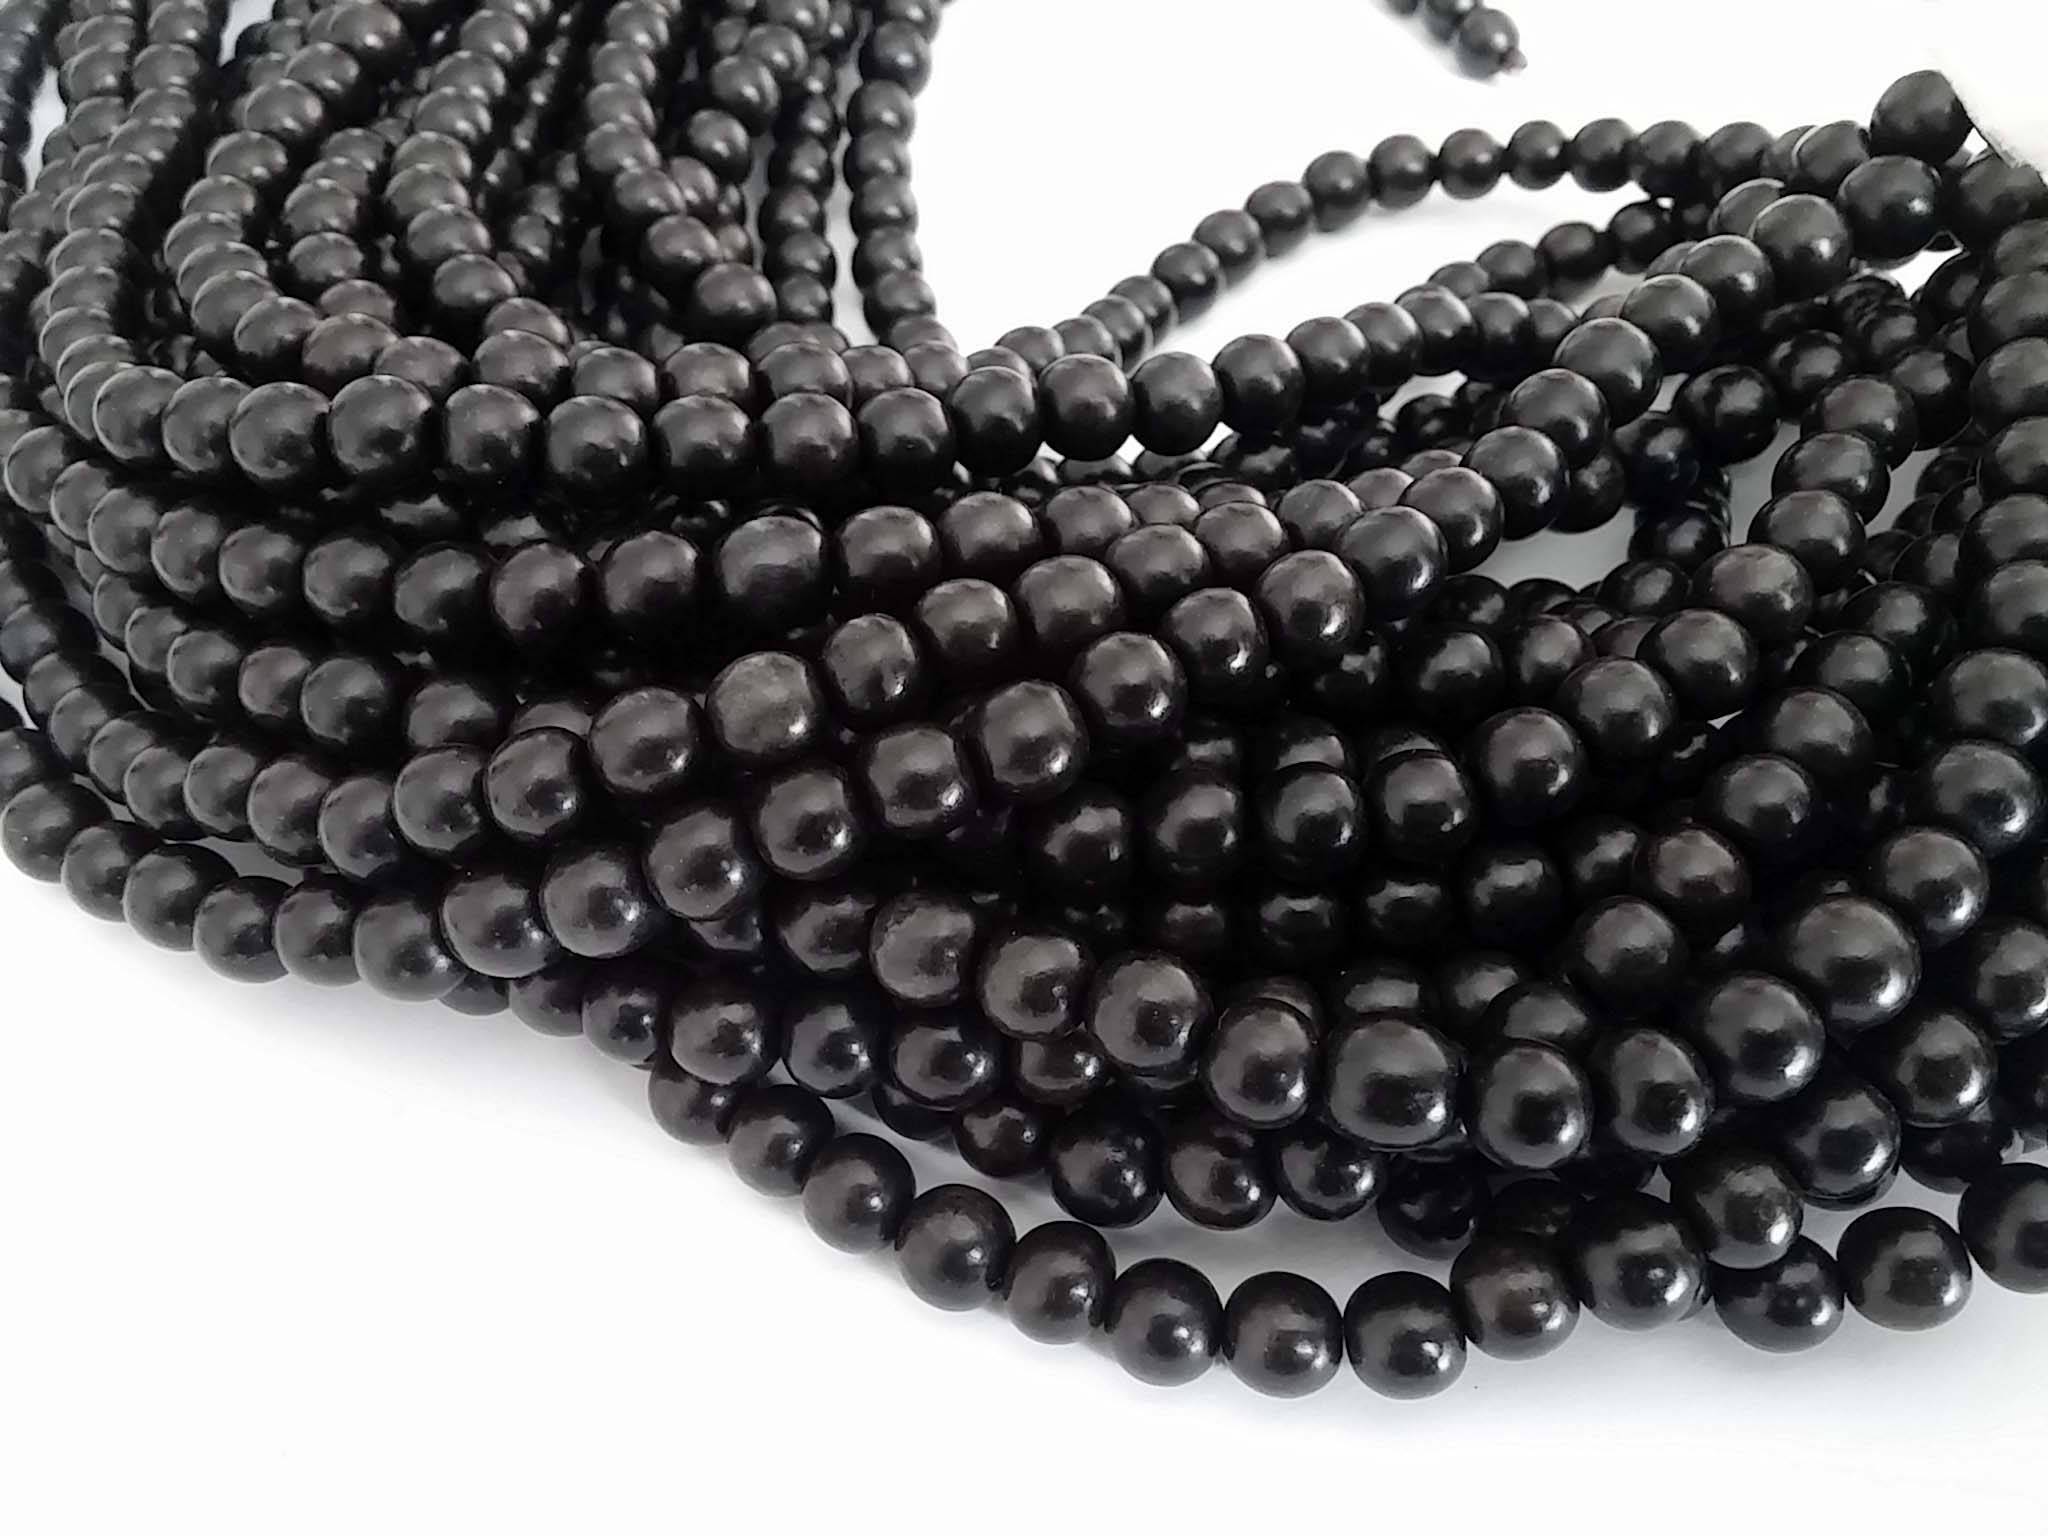 Exotic Black Kamagong wood round beads - Wooden Beads 6 or 8mm